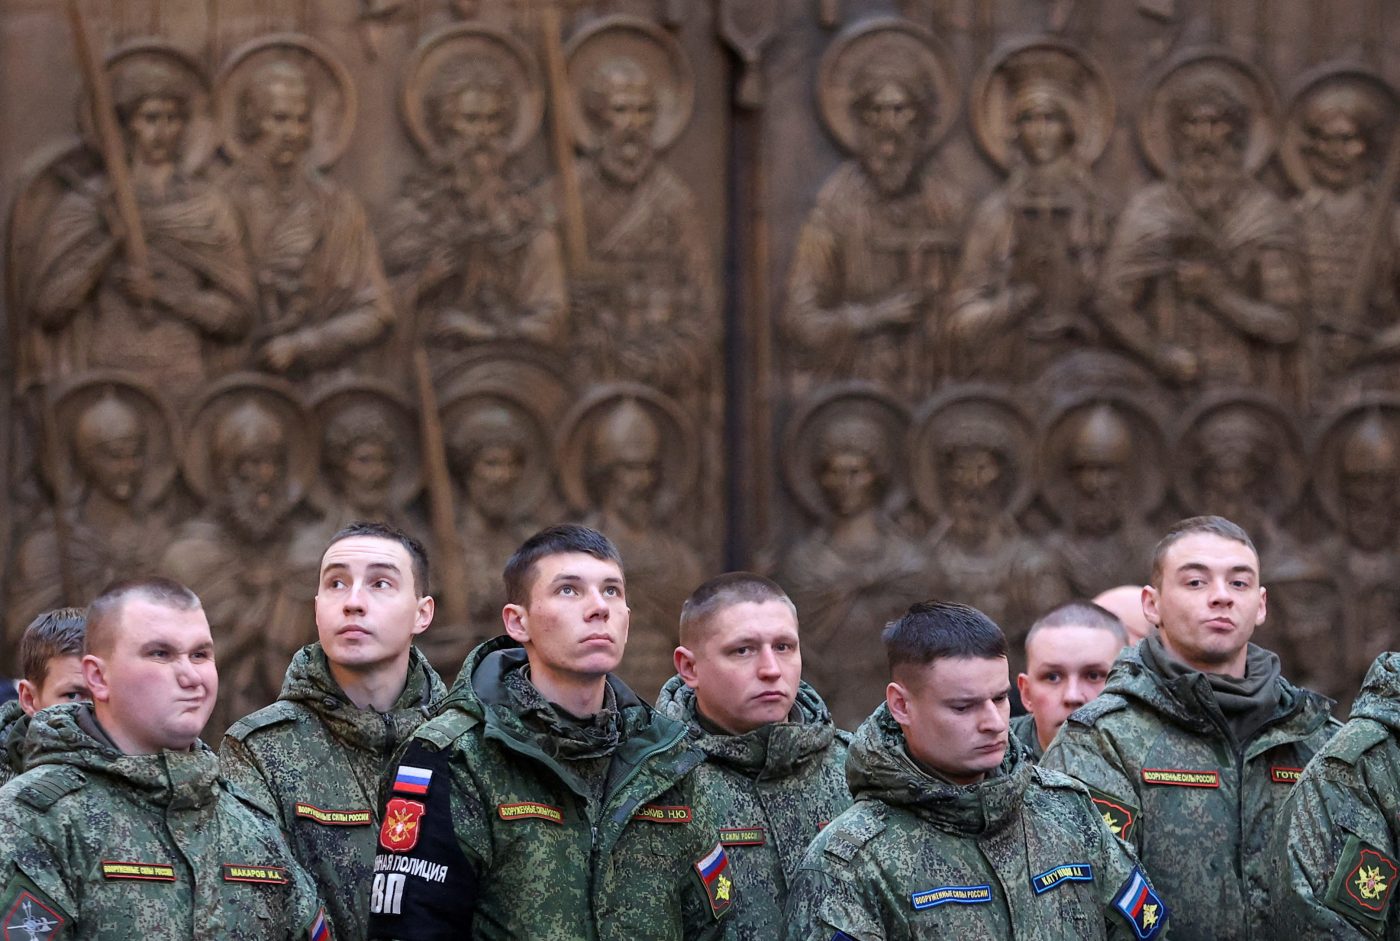 Photo: Russian service personnel attend a service led for believers, including multi-child families, Russia's soldiers involved in a military campaign in Ukraine and their relatives, at the Main Cathedral of the Russian Armed Forces near Moscow, Russia, January 15, 2023. Credit: REUTERS/Yulia Morozova TPX IMAGES OF THE DAY